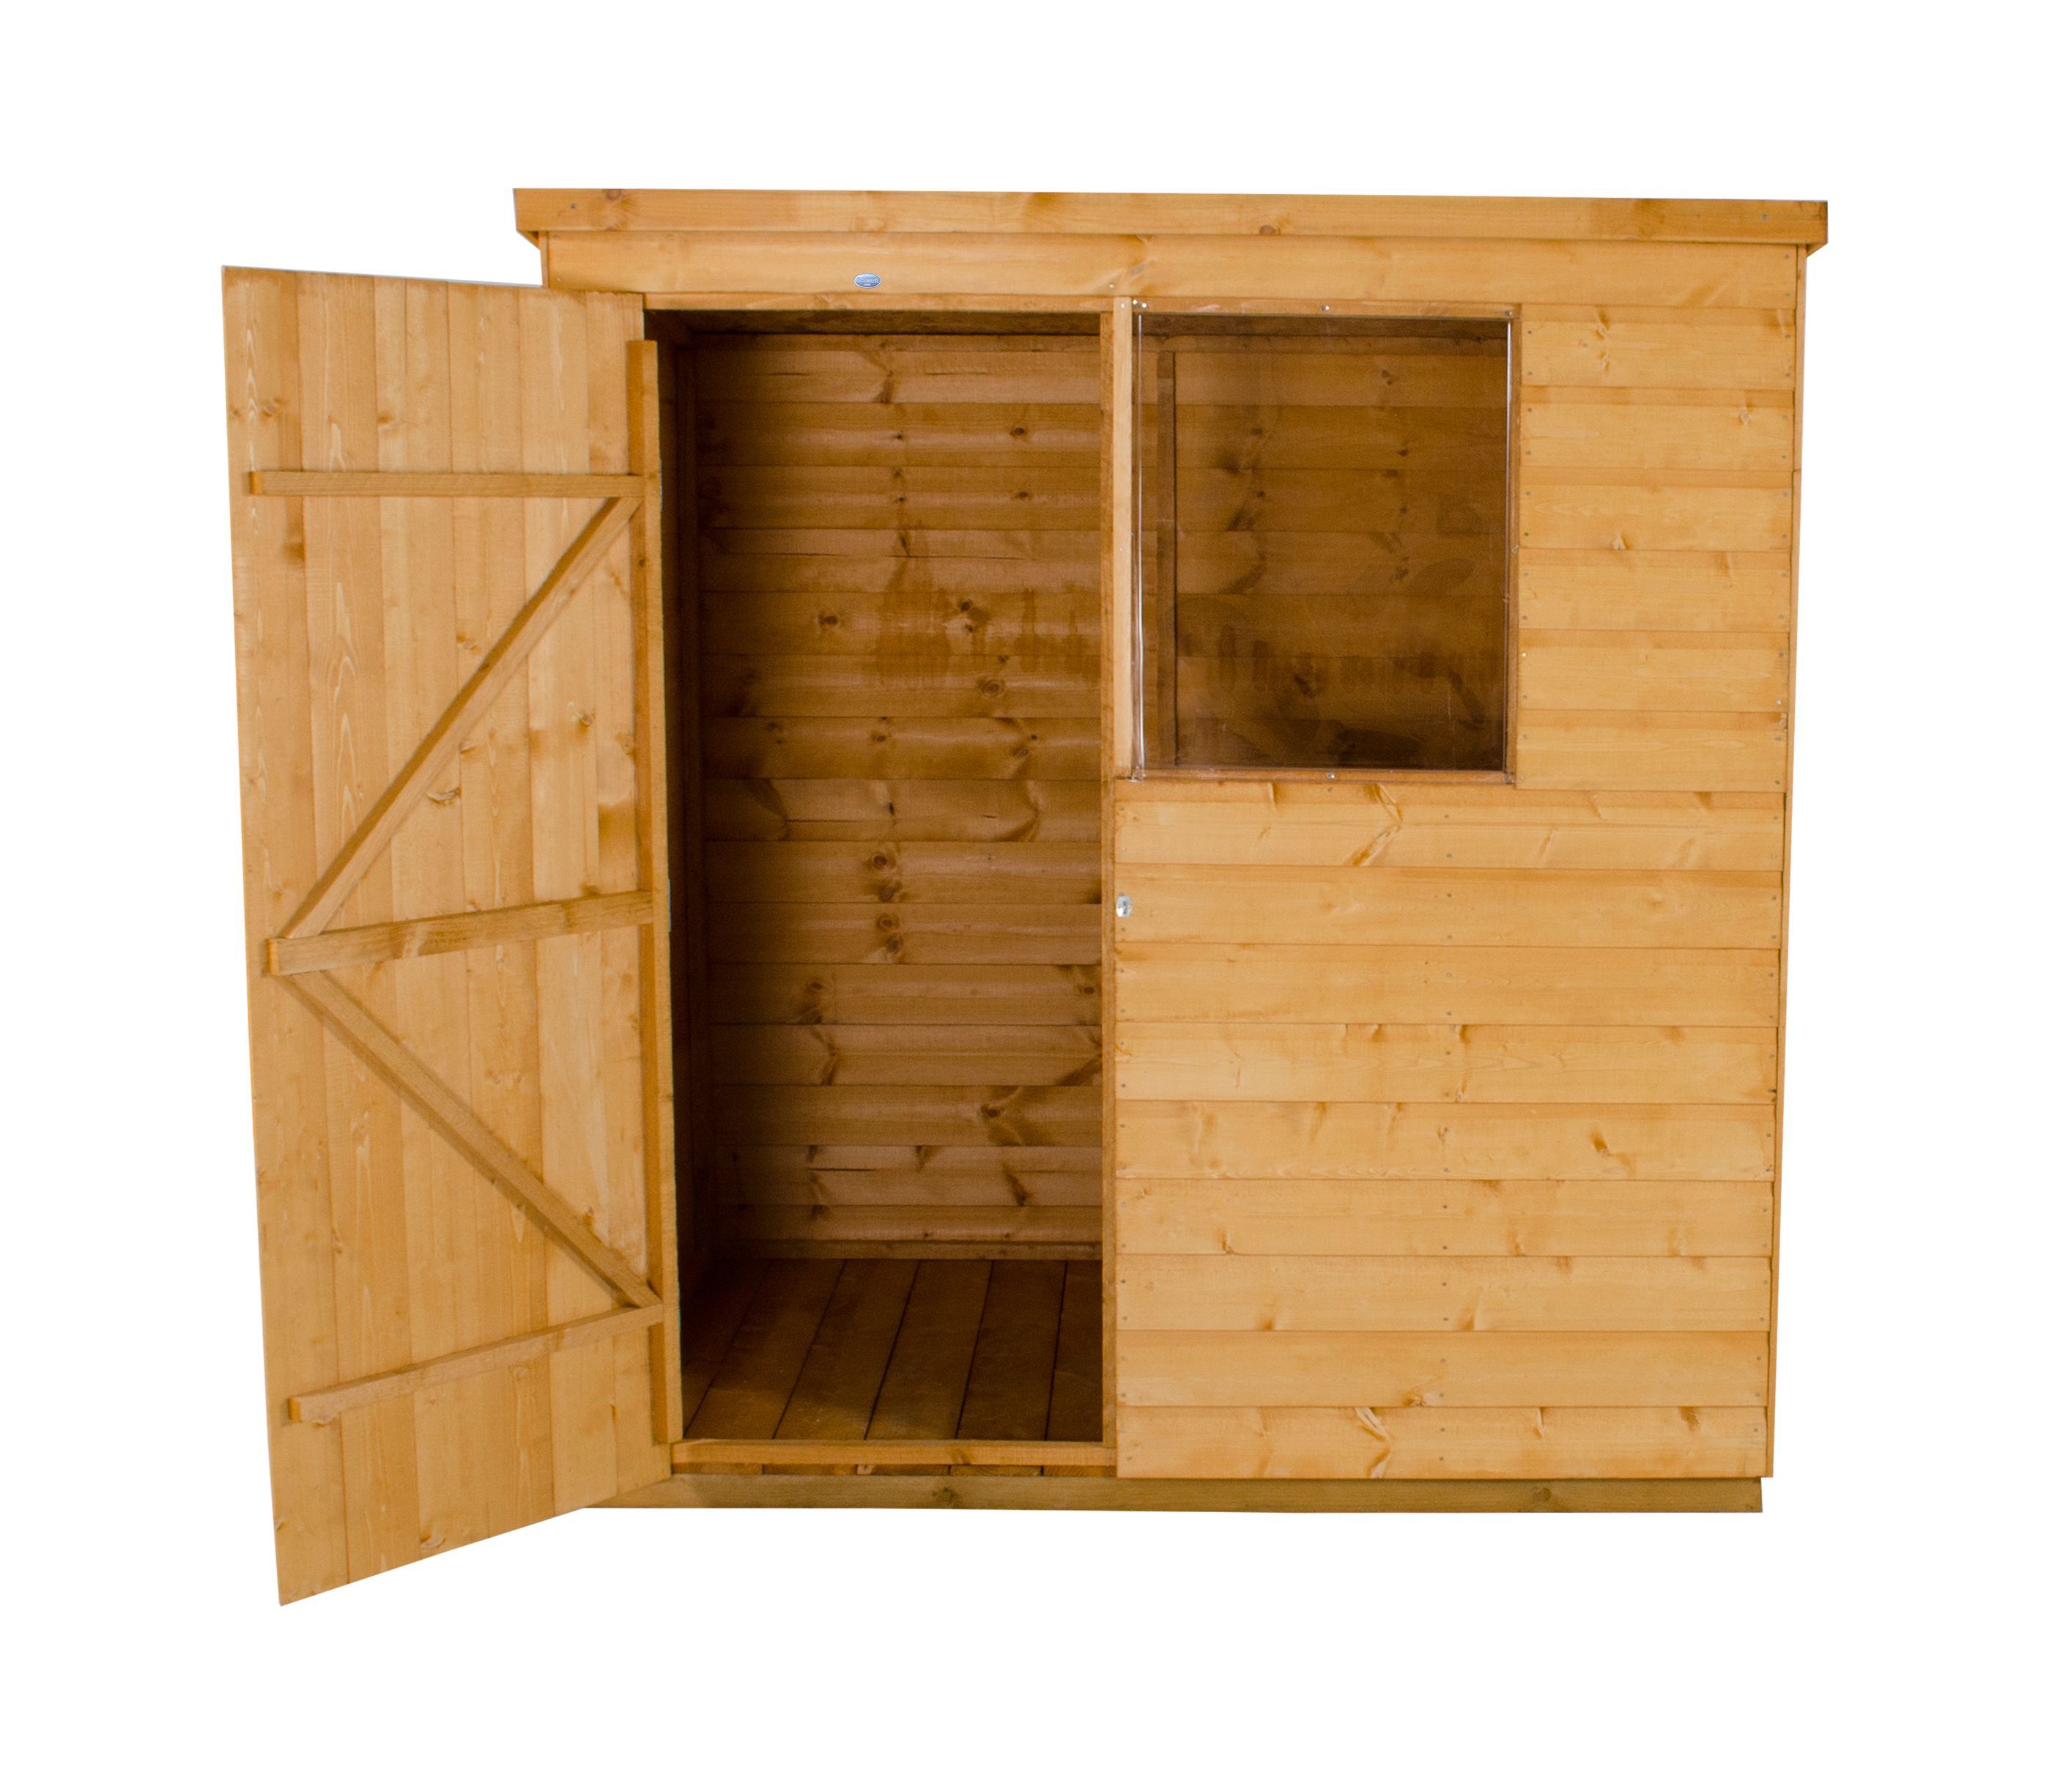 Forest Garden 6x4 ft Pent Golden brown Wooden Shed with floor & 1 window (Base included)